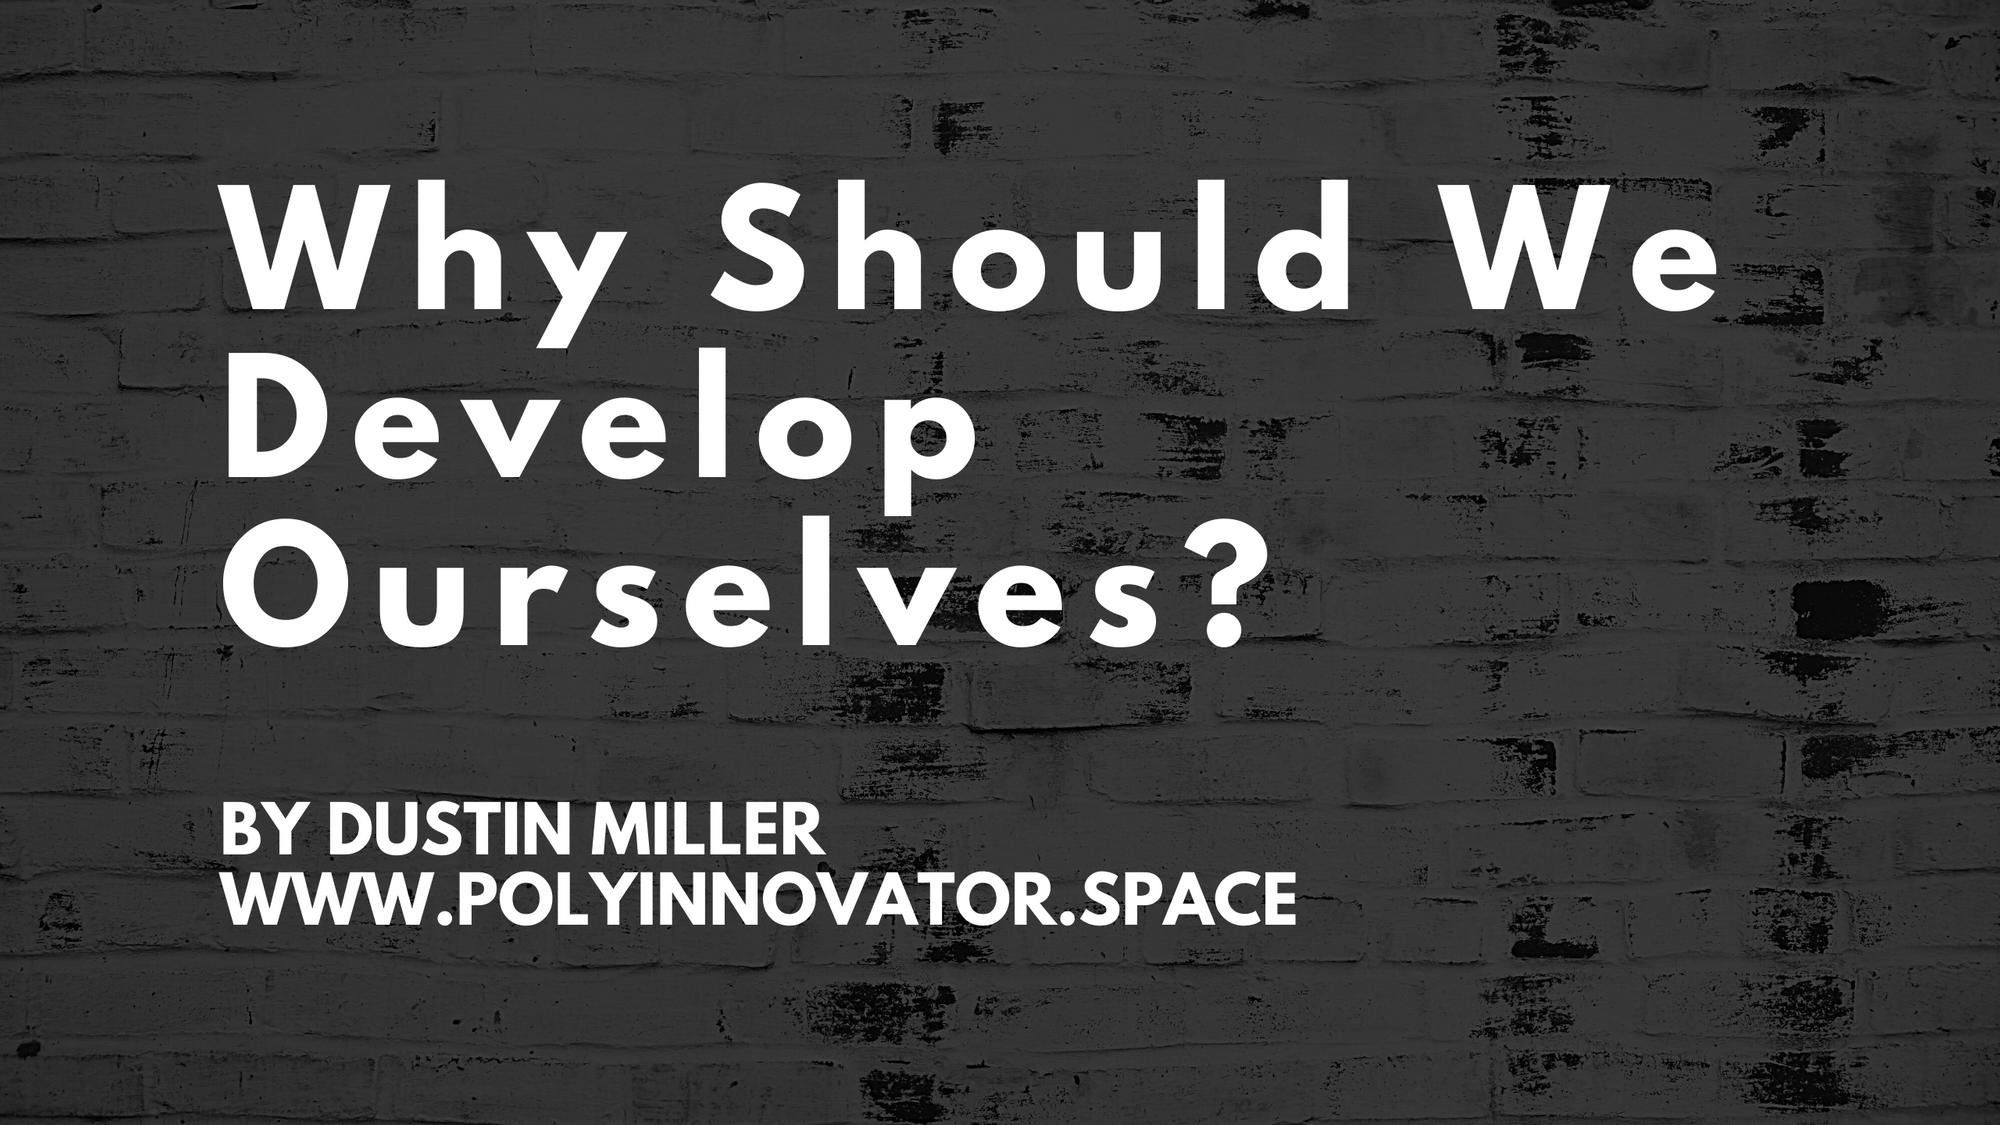 Why Should We Develop Ourselves?